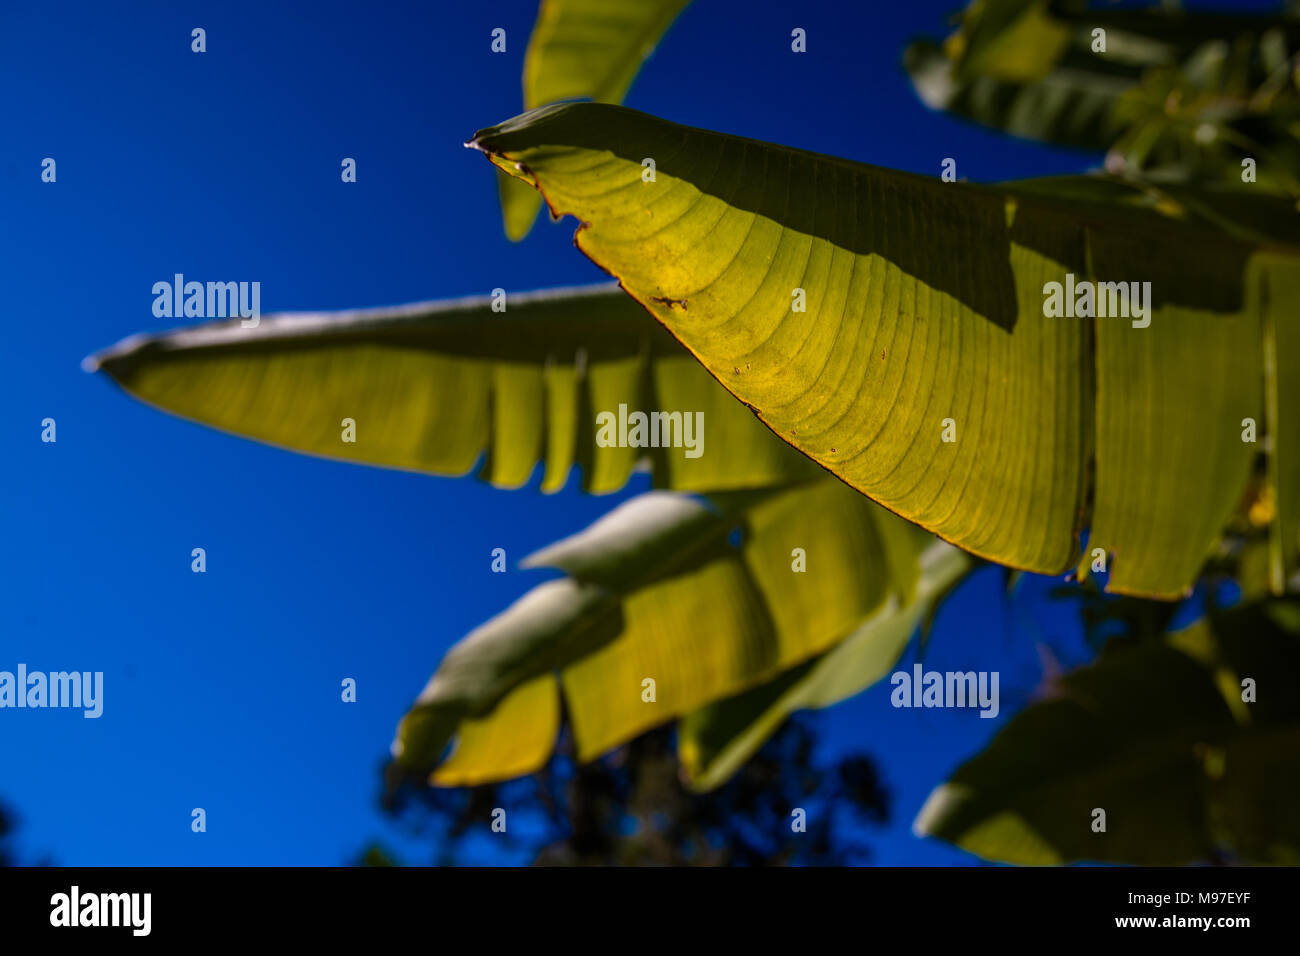 A banana tree and its fronds in close-up in a rainforest in Jamaica, Caribbean islands. Stock Photo